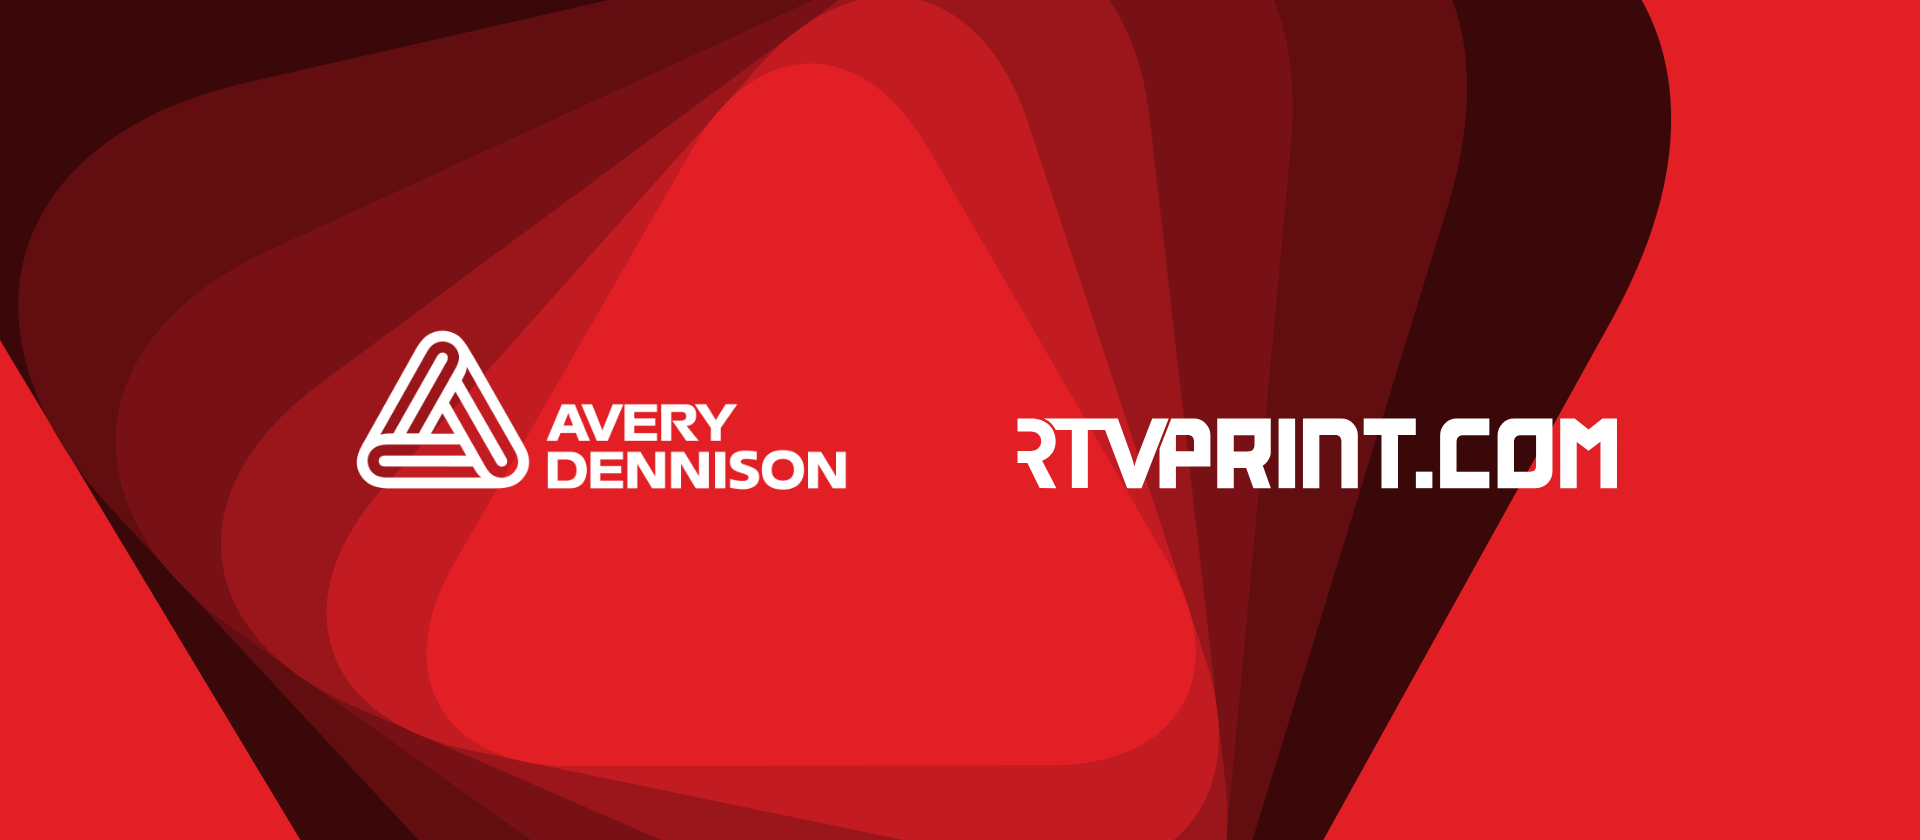 Avery Dennison Completes Acquisition of Rietveld